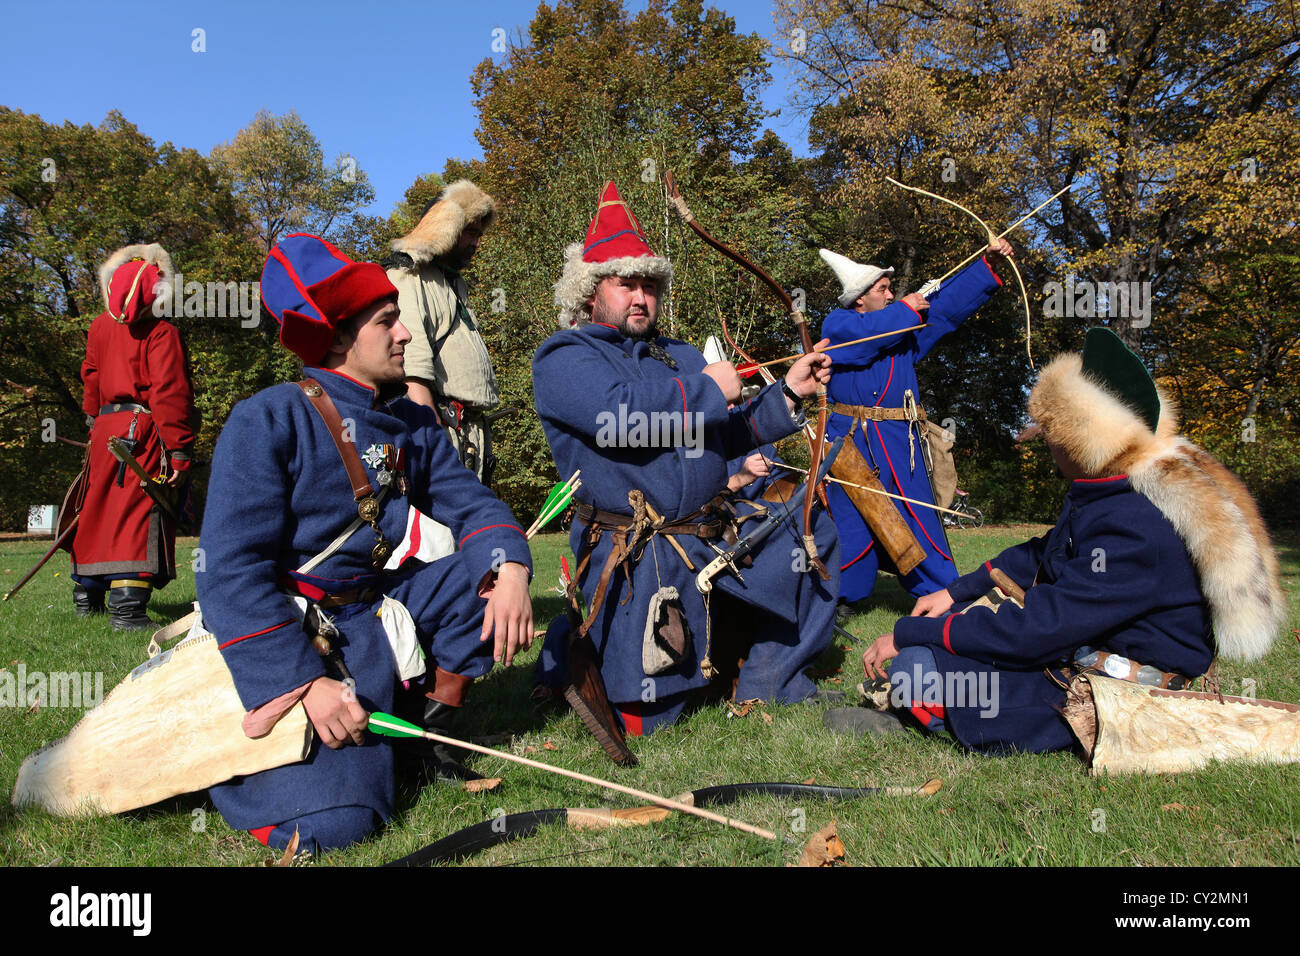 Group of Bashkirs in traditional costumes.Bashkirs are a Turkic people indigenous to Bashkortostan,a republic in eastern Russia. Stock Photo